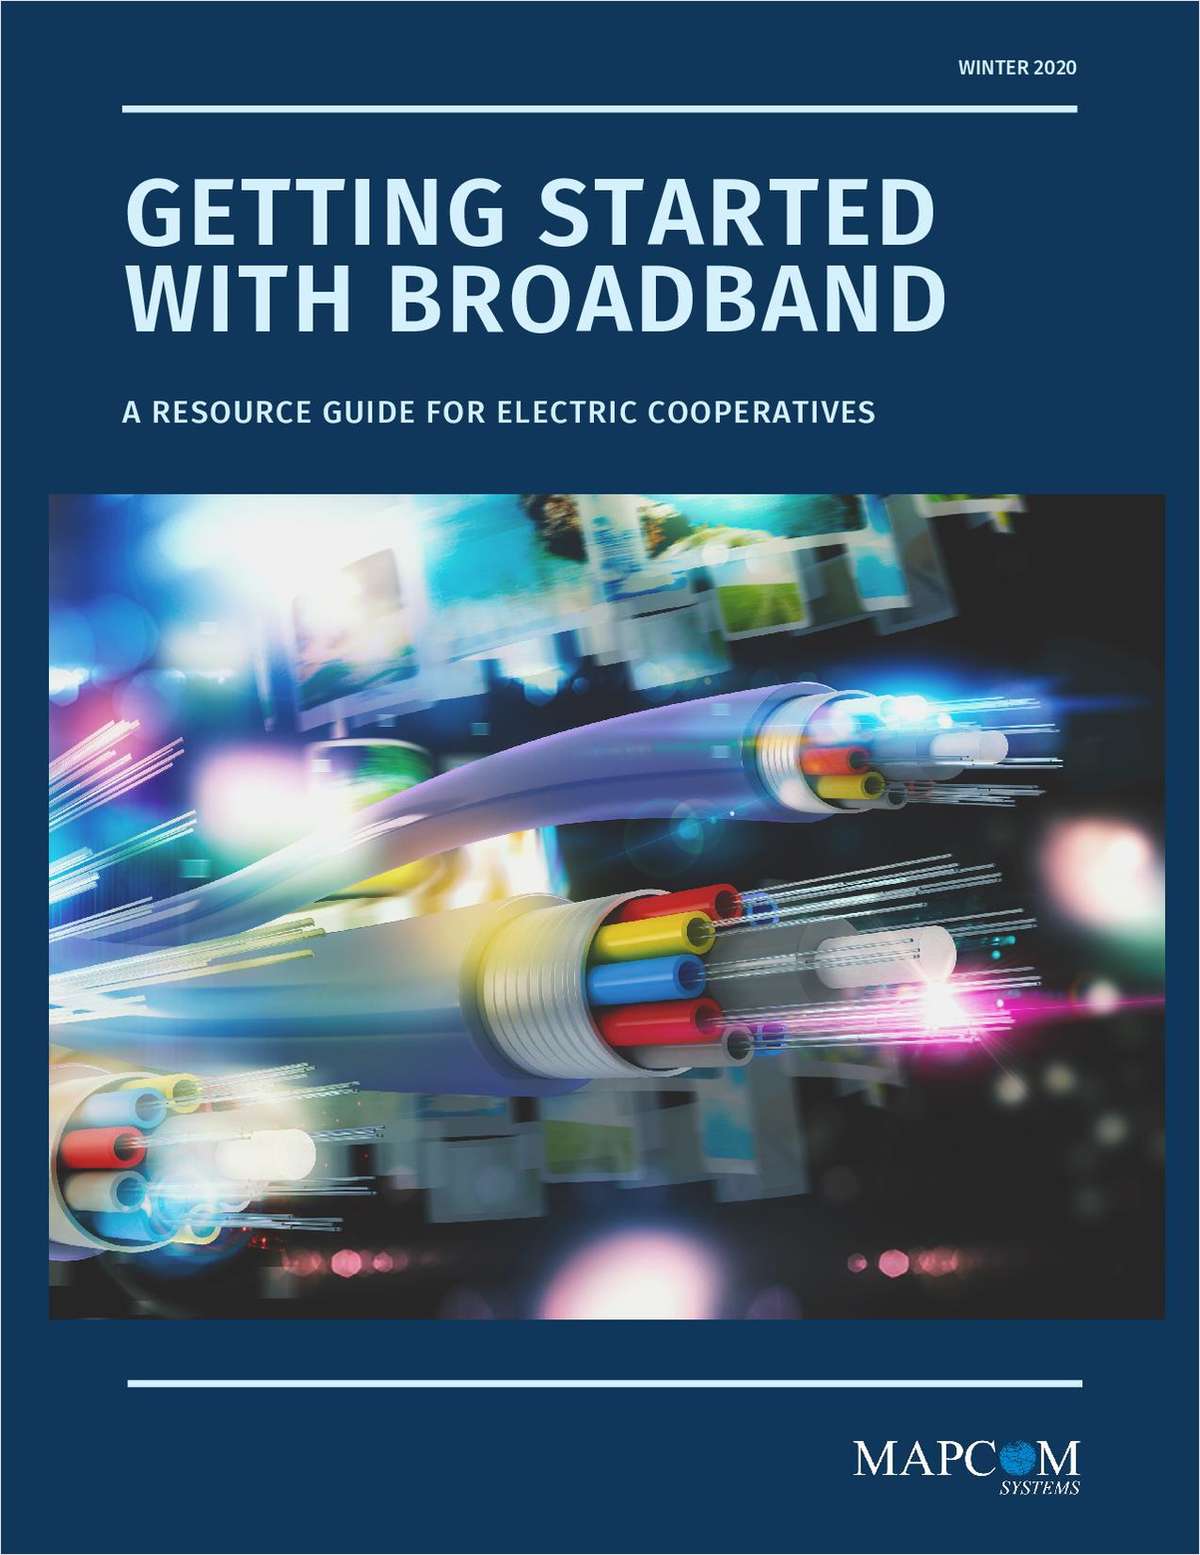 Getting Started with Broadband: A Guide for Electric Cooperatives